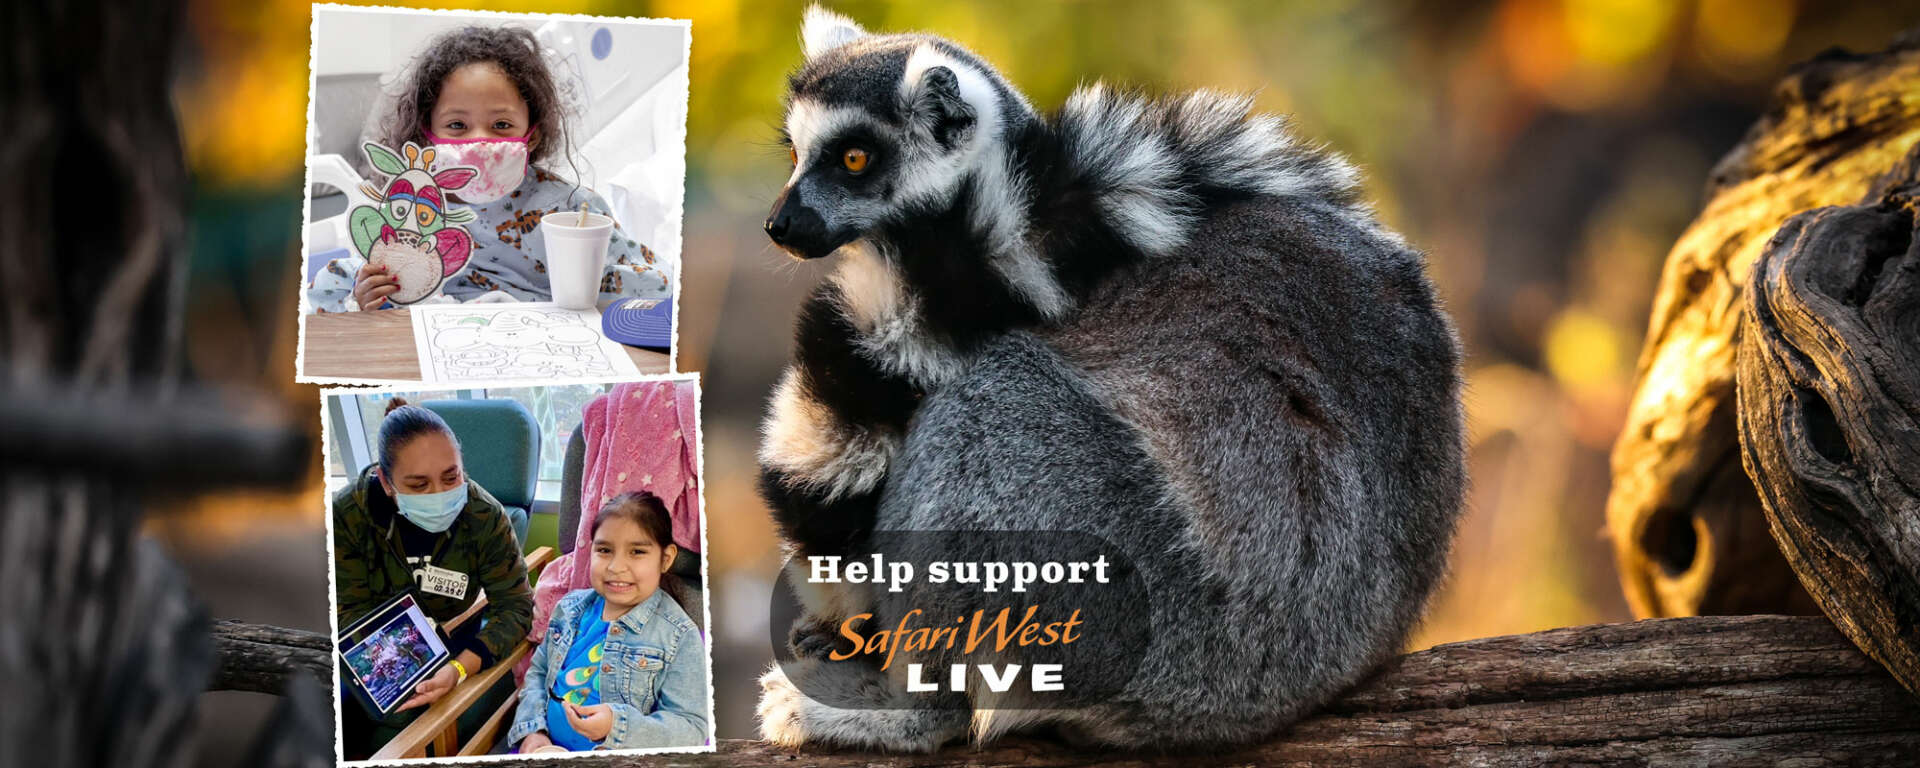 Group Business with lemur, kids, and Safari West Live